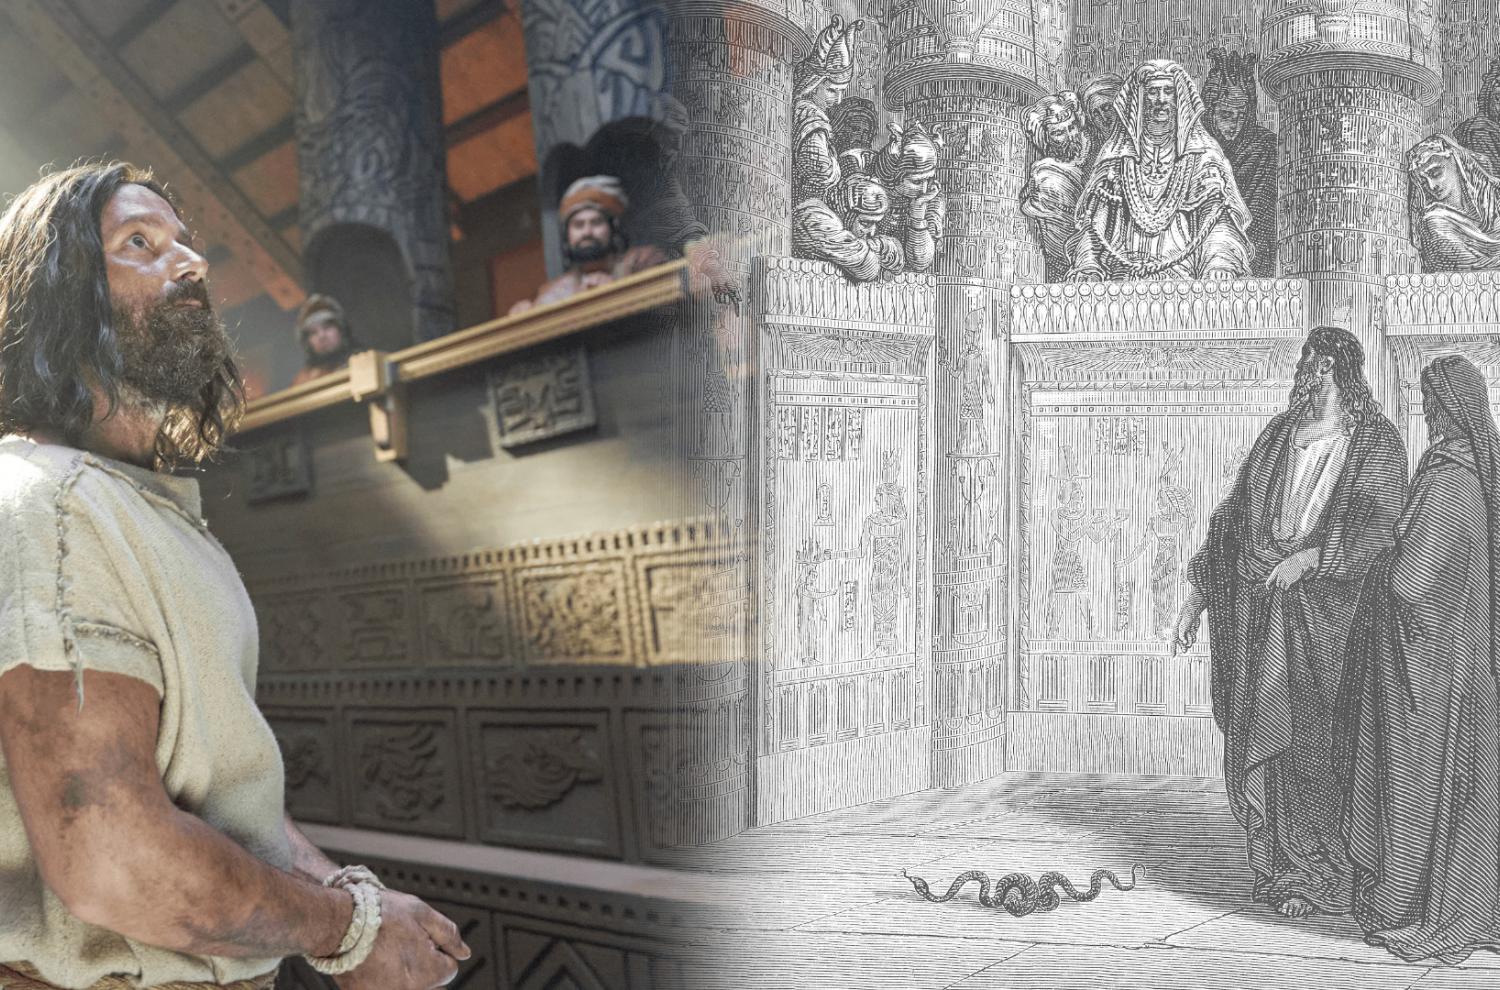 Left, an image from the Book of Mormon Videos of The Church of Jesus Christ of Latter-day Saints. Right, “Moses and Aaron Appear Before Pharaoh” by Gustave Dore.